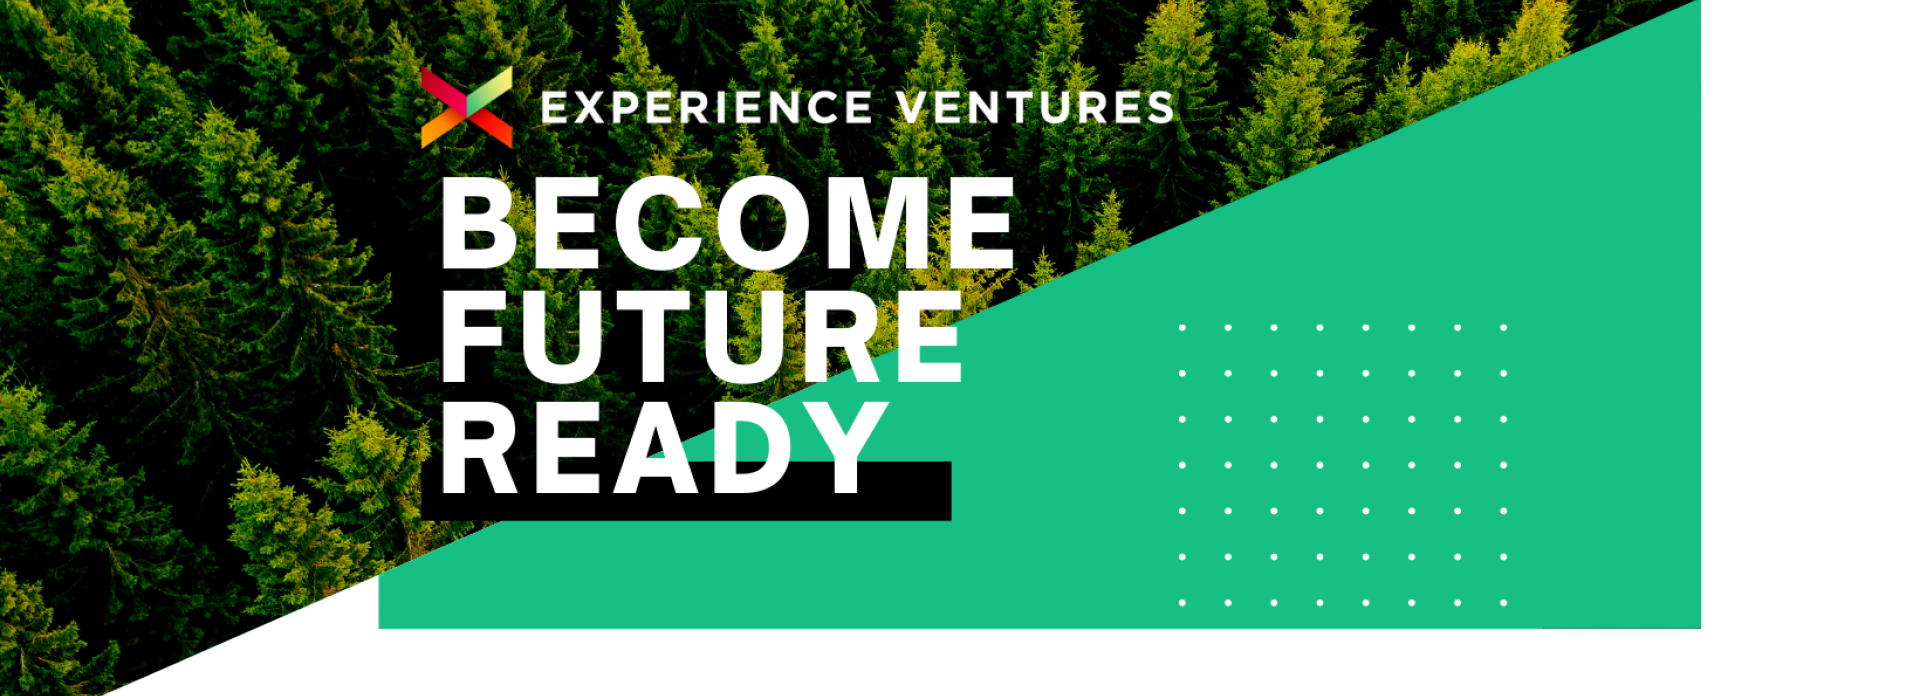 Experience Ventures - Become Future Ready